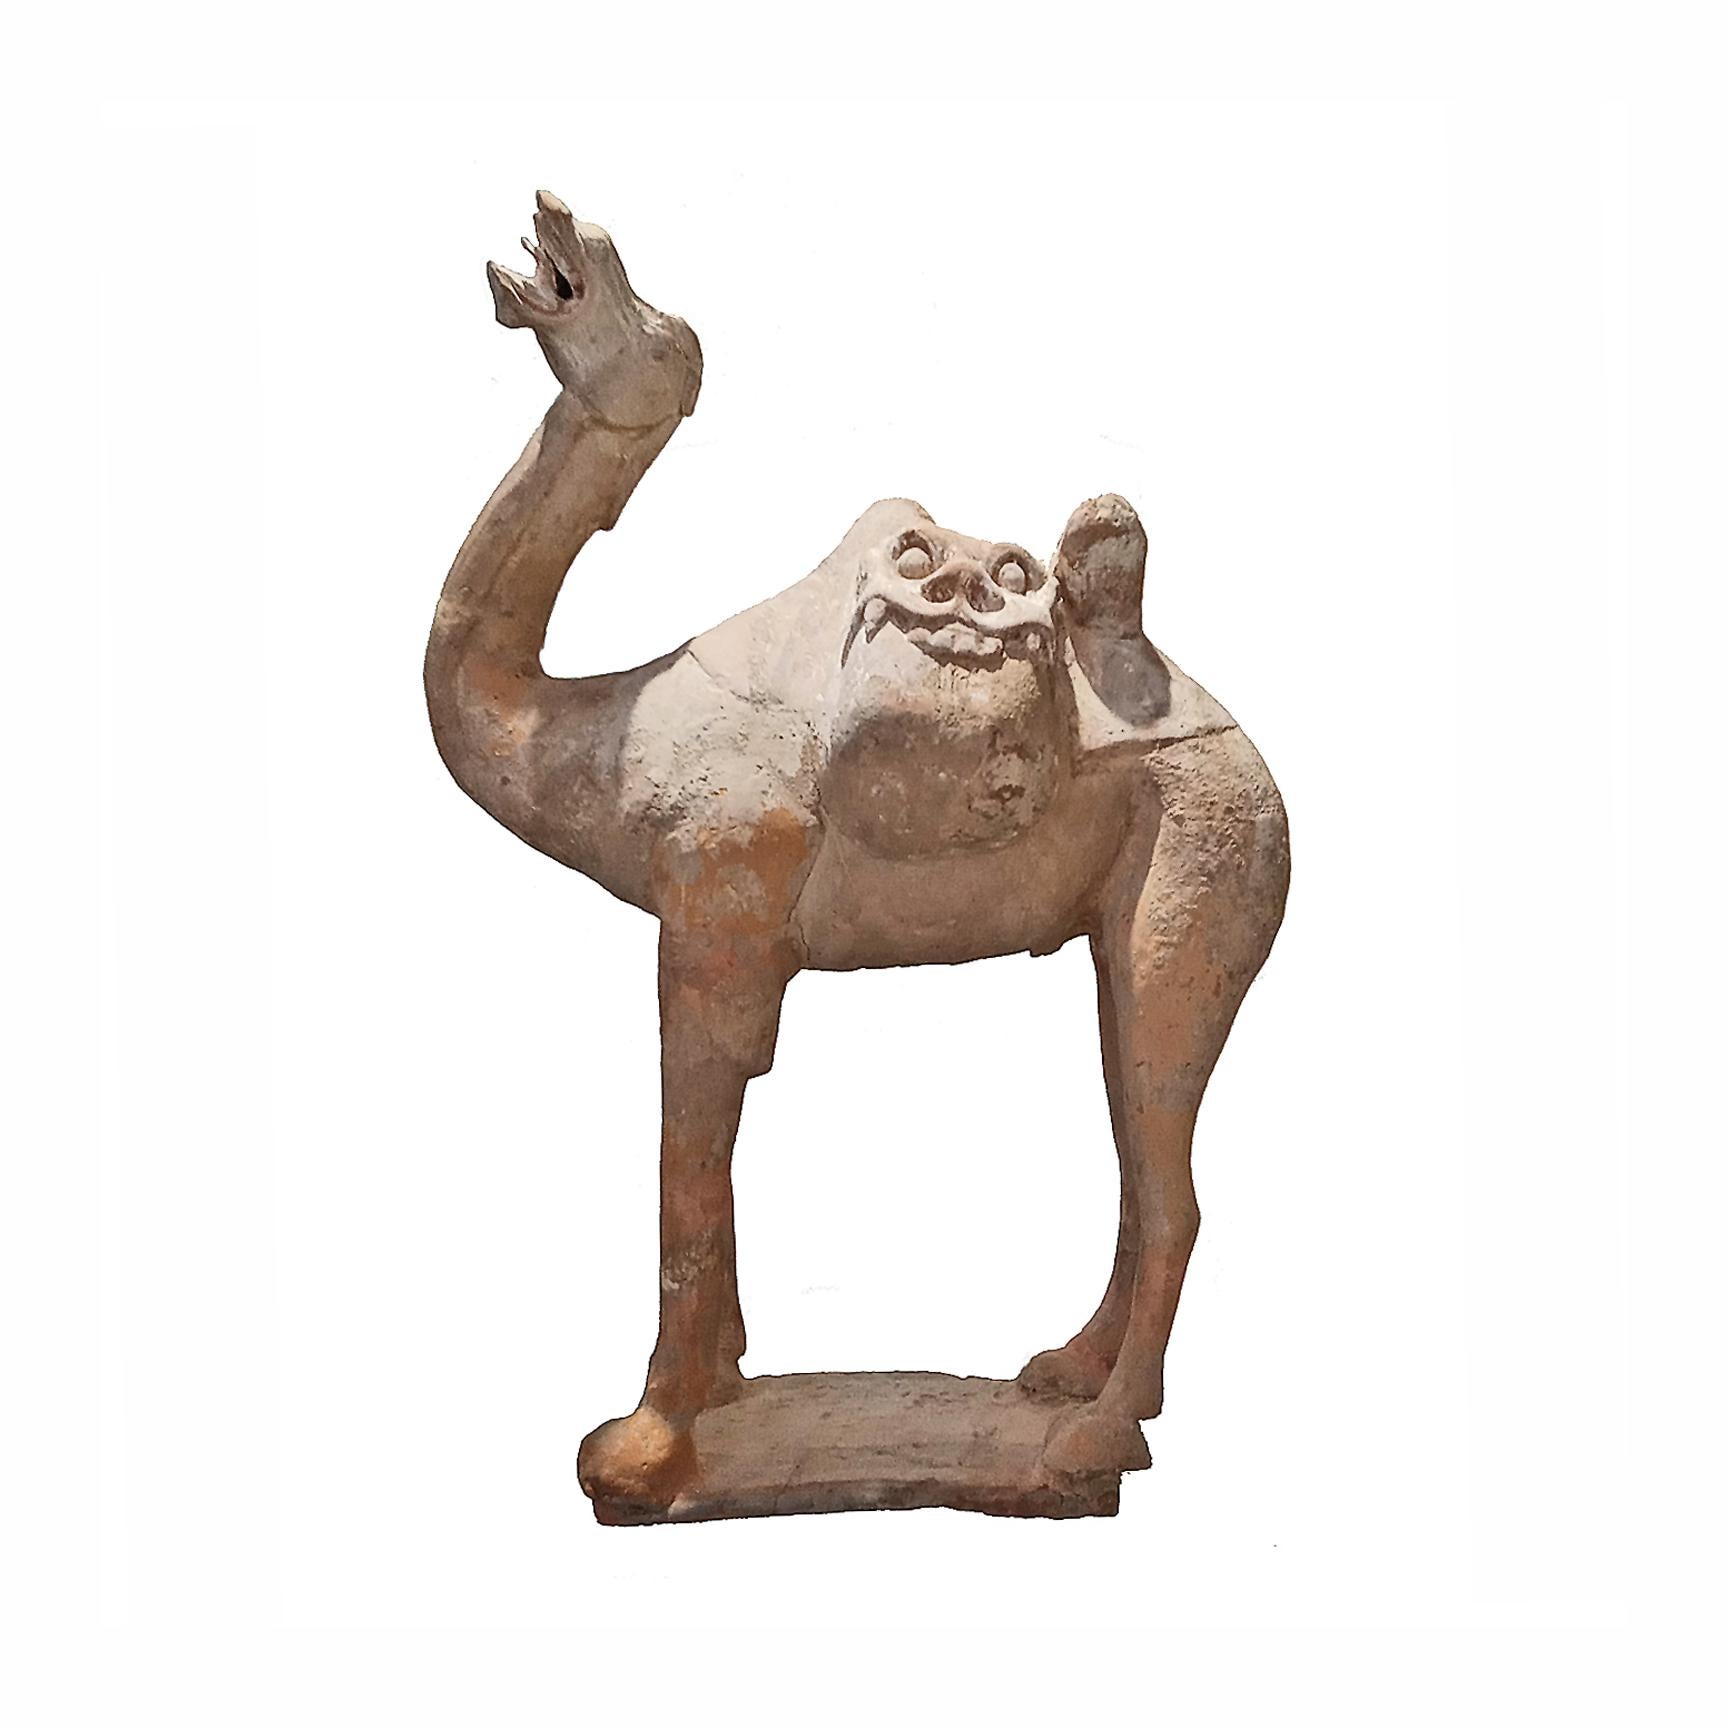 A Chinese Terracotta camel from the Tang Dynasty.

To the people of China’s Tang dynasty (618-907), very few animals were as  useful and revered as the horse and the camel. The Bactrian camel was used to haul trade goods along the silk roads leading